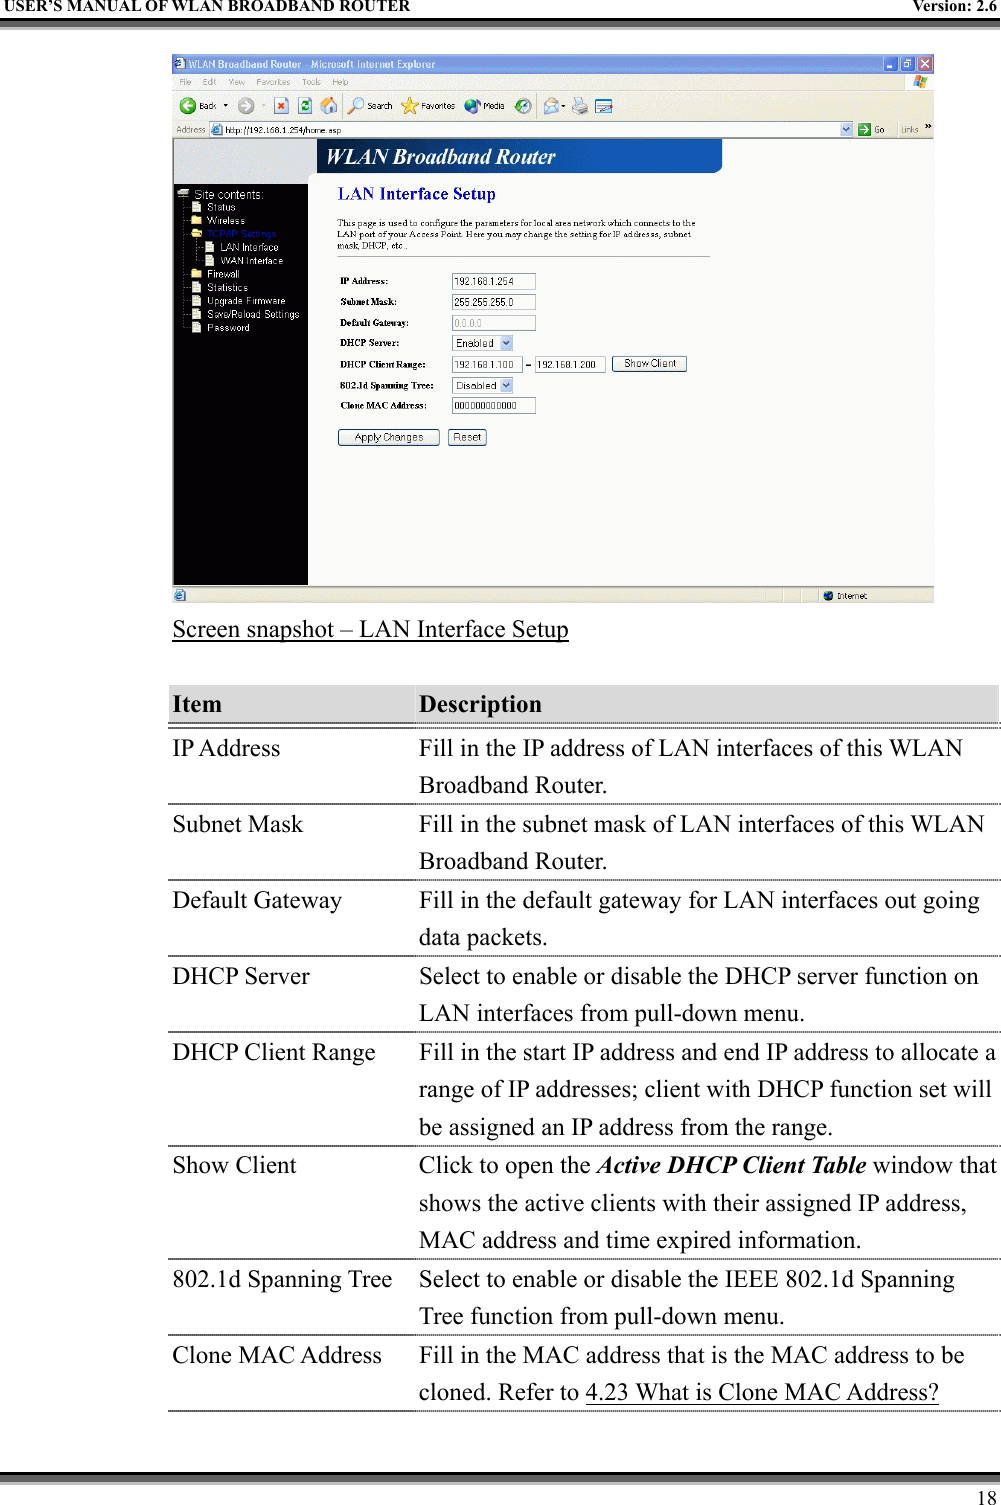   USER’S MANUAL OF WLAN BROADBAND ROUTER    Version: 2.6     18  Screen snapshot – LAN Interface Setup  Item  Description   IP Address  Fill in the IP address of LAN interfaces of this WLAN Broadband Router. Subnet Mask  Fill in the subnet mask of LAN interfaces of this WLAN Broadband Router. Default Gateway  Fill in the default gateway for LAN interfaces out going data packets. DHCP Server  Select to enable or disable the DHCP server function on LAN interfaces from pull-down menu.     DHCP Client Range  Fill in the start IP address and end IP address to allocate a range of IP addresses; client with DHCP function set will be assigned an IP address from the range. Show Client  Click to open the Active DHCP Client Table window that shows the active clients with their assigned IP address, MAC address and time expired information. 802.1d Spanning Tree  Select to enable or disable the IEEE 802.1d Spanning Tree function from pull-down menu. Clone MAC Address  Fill in the MAC address that is the MAC address to be cloned. Refer to 4.23 What is Clone MAC Address? 